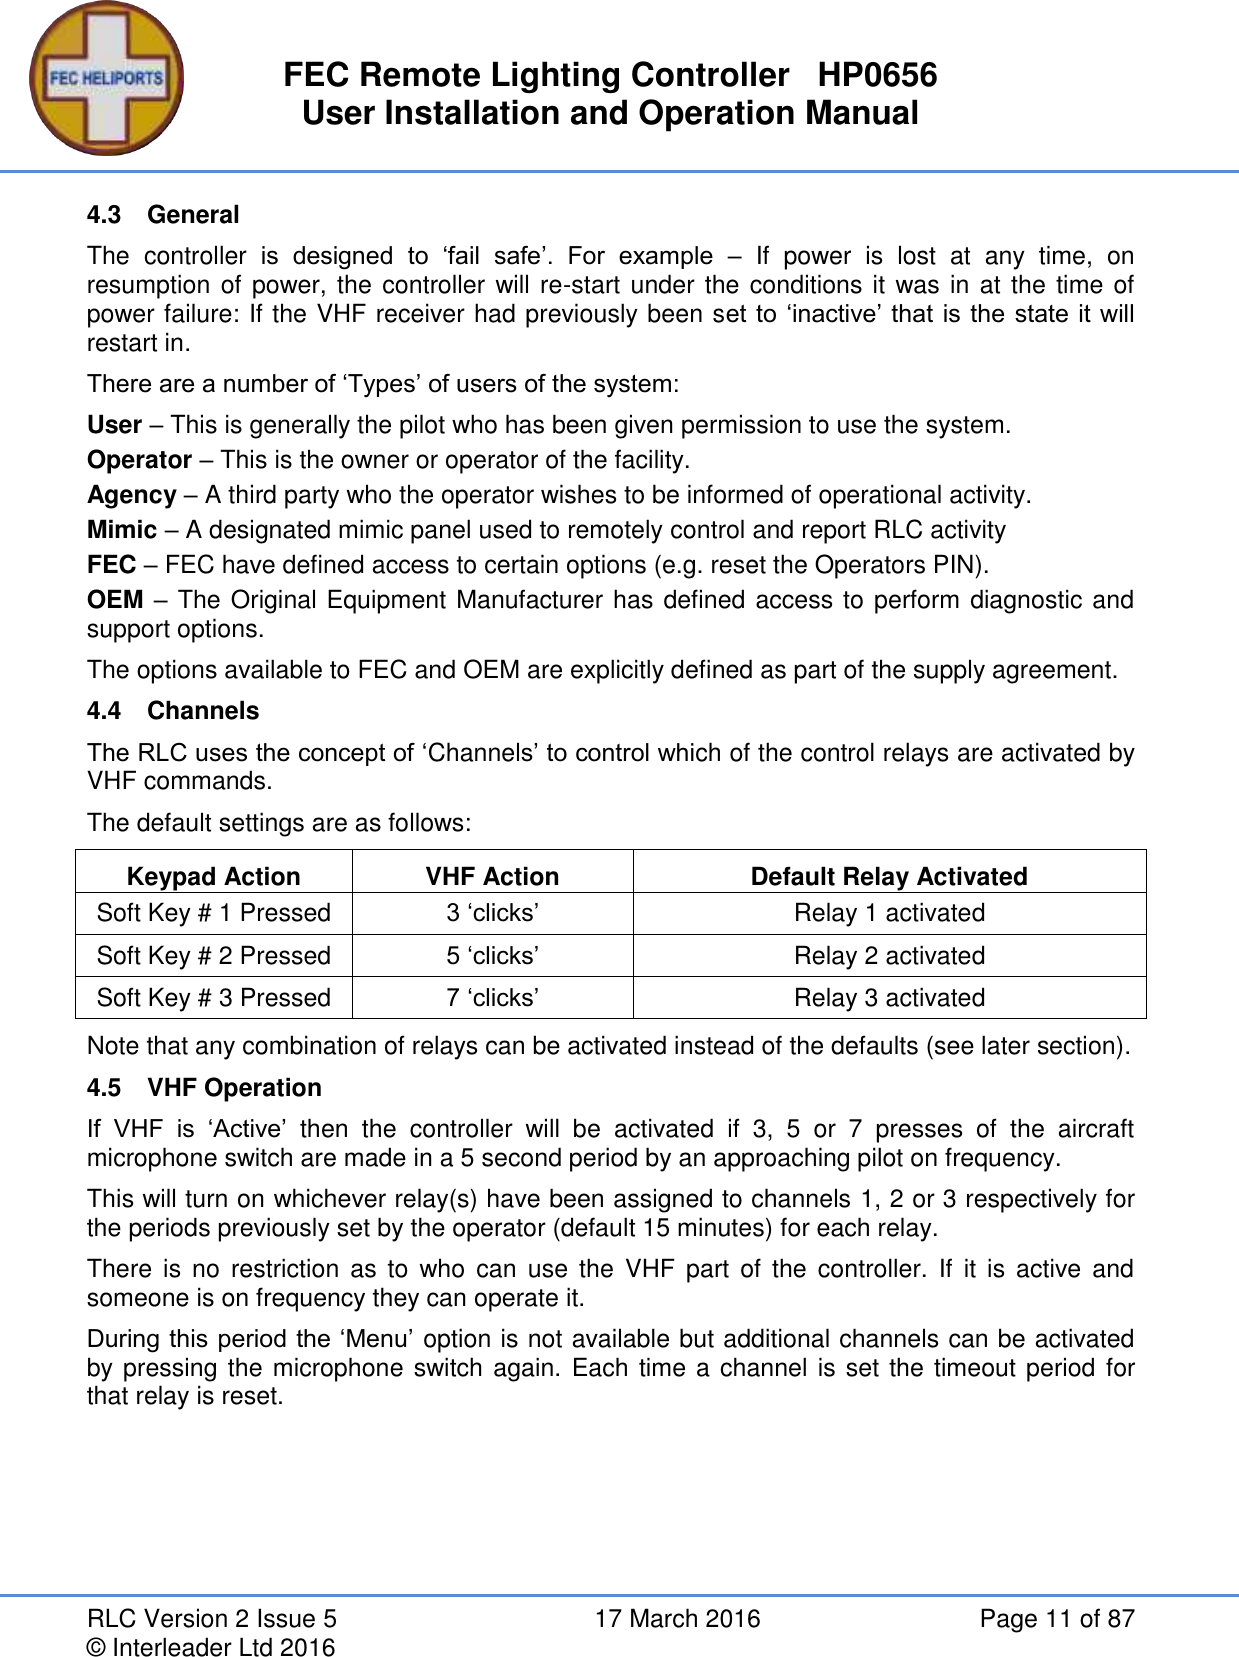 FEC Remote Lighting Controller   HP0656 User Installation and Operation Manual RLC Version 2 Issue 5  17 March 2016  Page 11 of 87 © Interleader Ltd 2016 4.3  General The  controller  is  designed  to  ‘fail  safe’.  For  example  –  If  power  is  lost  at  any  time,  on resumption of power, the controller will re-start under the conditions it was in at the time of power failure: If the VHF receiver had previously been set to ‘inactive’ that is the state it will restart in. There are a number of ‘Types’ of users of the system: User – This is generally the pilot who has been given permission to use the system. Operator – This is the owner or operator of the facility. Agency – A third party who the operator wishes to be informed of operational activity. Mimic – A designated mimic panel used to remotely control and report RLC activity  FEC – FEC have defined access to certain options (e.g. reset the Operators PIN). OEM – The Original Equipment Manufacturer has defined access to perform diagnostic and support options. The options available to FEC and OEM are explicitly defined as part of the supply agreement. 4.4  Channels The RLC uses the concept of ‘Channels’ to control which of the control relays are activated by VHF commands. The default settings are as follows:  Keypad Action VHF Action Default Relay Activated Soft Key # 1 Pressed 3 ‘clicks’ Relay 1 activated Soft Key # 2 Pressed 5 ‘clicks’ Relay 2 activated Soft Key # 3 Pressed 7 ‘clicks’ Relay 3 activated Note that any combination of relays can be activated instead of the defaults (see later section). 4.5  VHF Operation If  VHF  is  ‘Active’  then  the  controller  will  be  activated  if  3,  5  or  7  presses  of  the  aircraft microphone switch are made in a 5 second period by an approaching pilot on frequency. This will turn on whichever relay(s) have been assigned to channels 1, 2 or 3 respectively for the periods previously set by the operator (default 15 minutes) for each relay.  There  is  no  restriction  as  to  who  can  use  the  VHF part  of  the controller.  If  it is  active  and someone is on frequency they can operate it. During this period the ‘Menu’  option is not available but additional channels can be activated by pressing the microphone switch again. Each time a channel is set the timeout period for that relay is reset.   